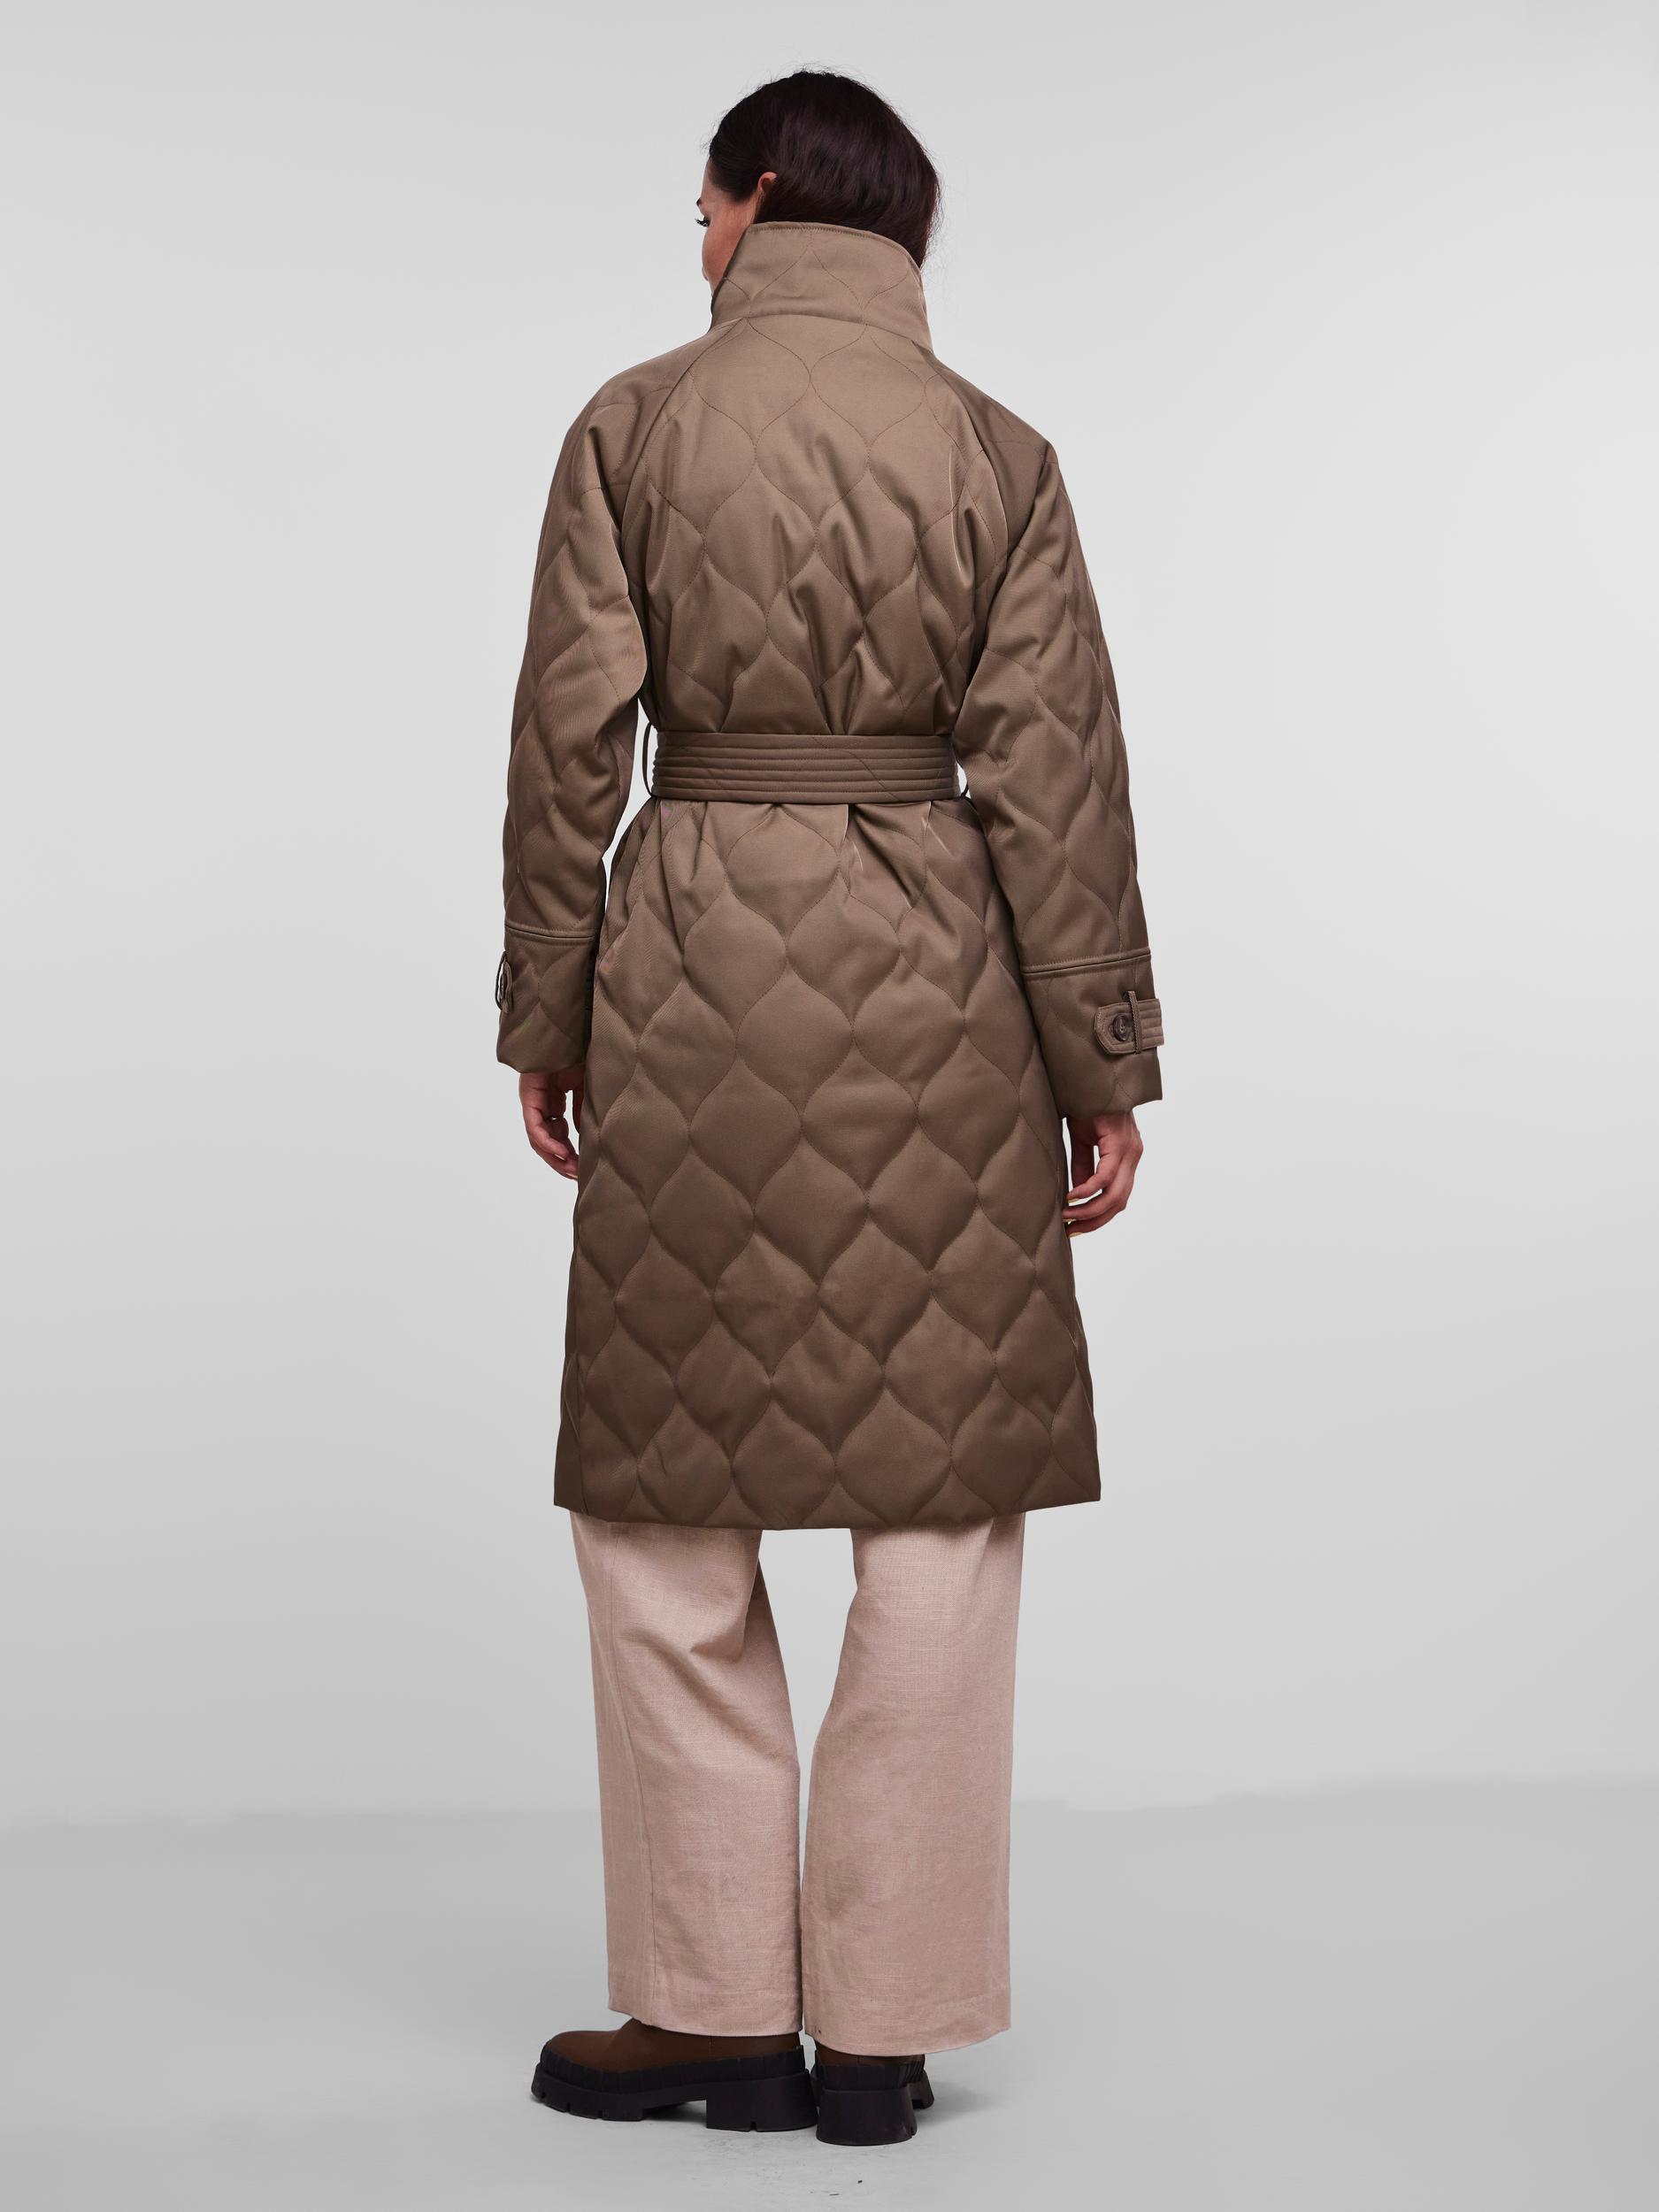 Y.A.S Beama Quilted Coat